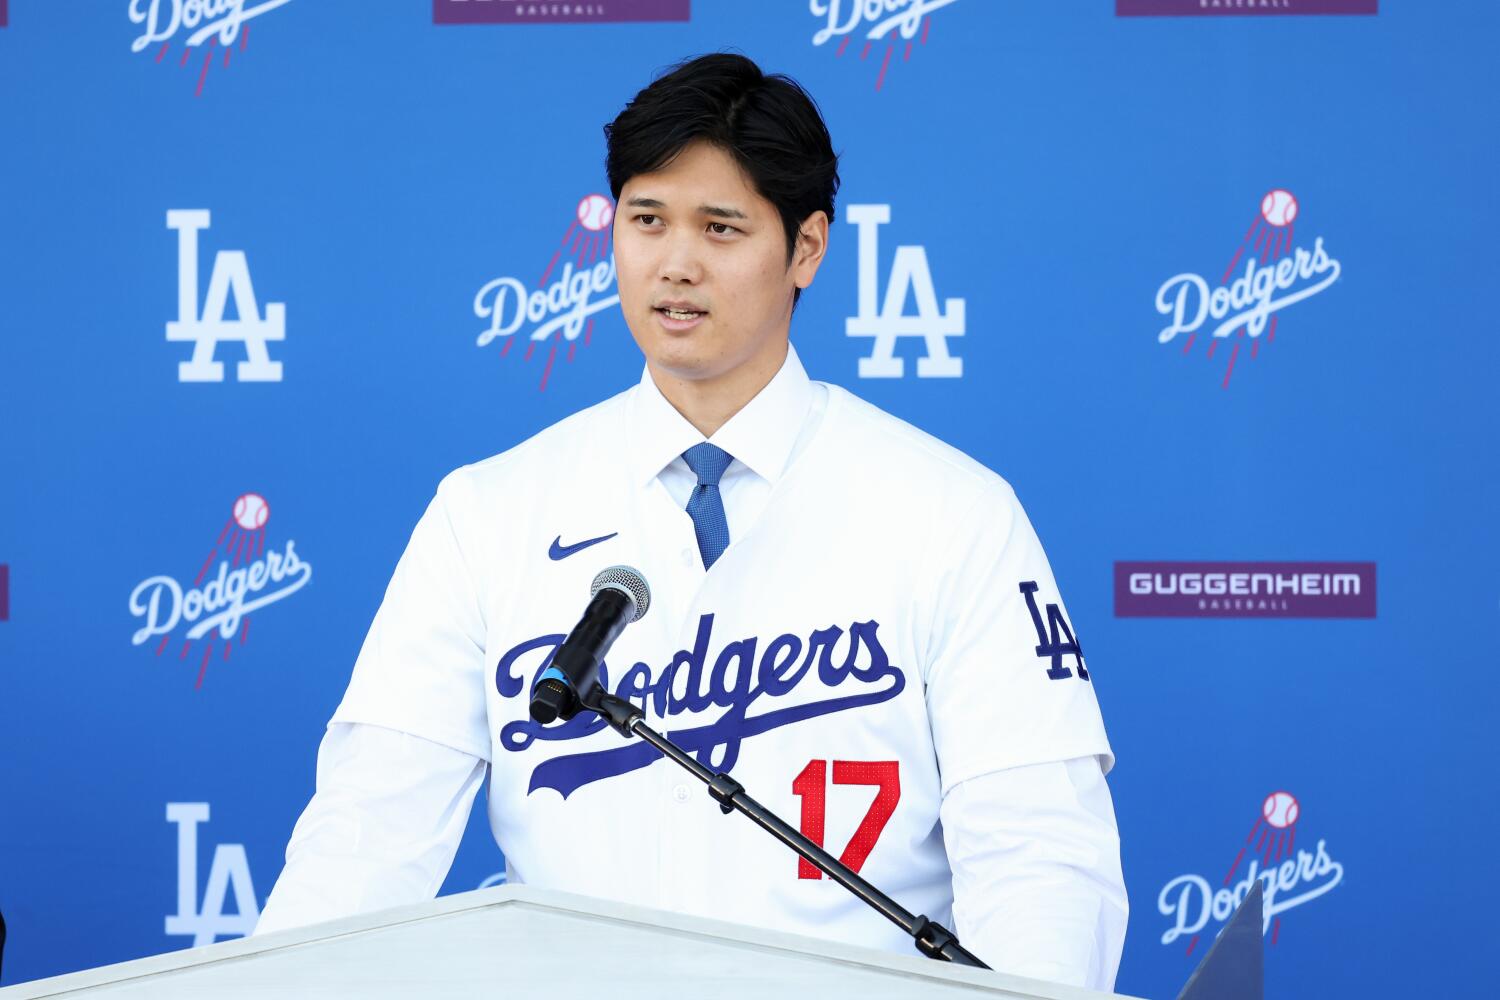 Ohtani hits one out of the park, gifting a Porsche to Dodger pitcher Joe Kelly's wife days before Christmas